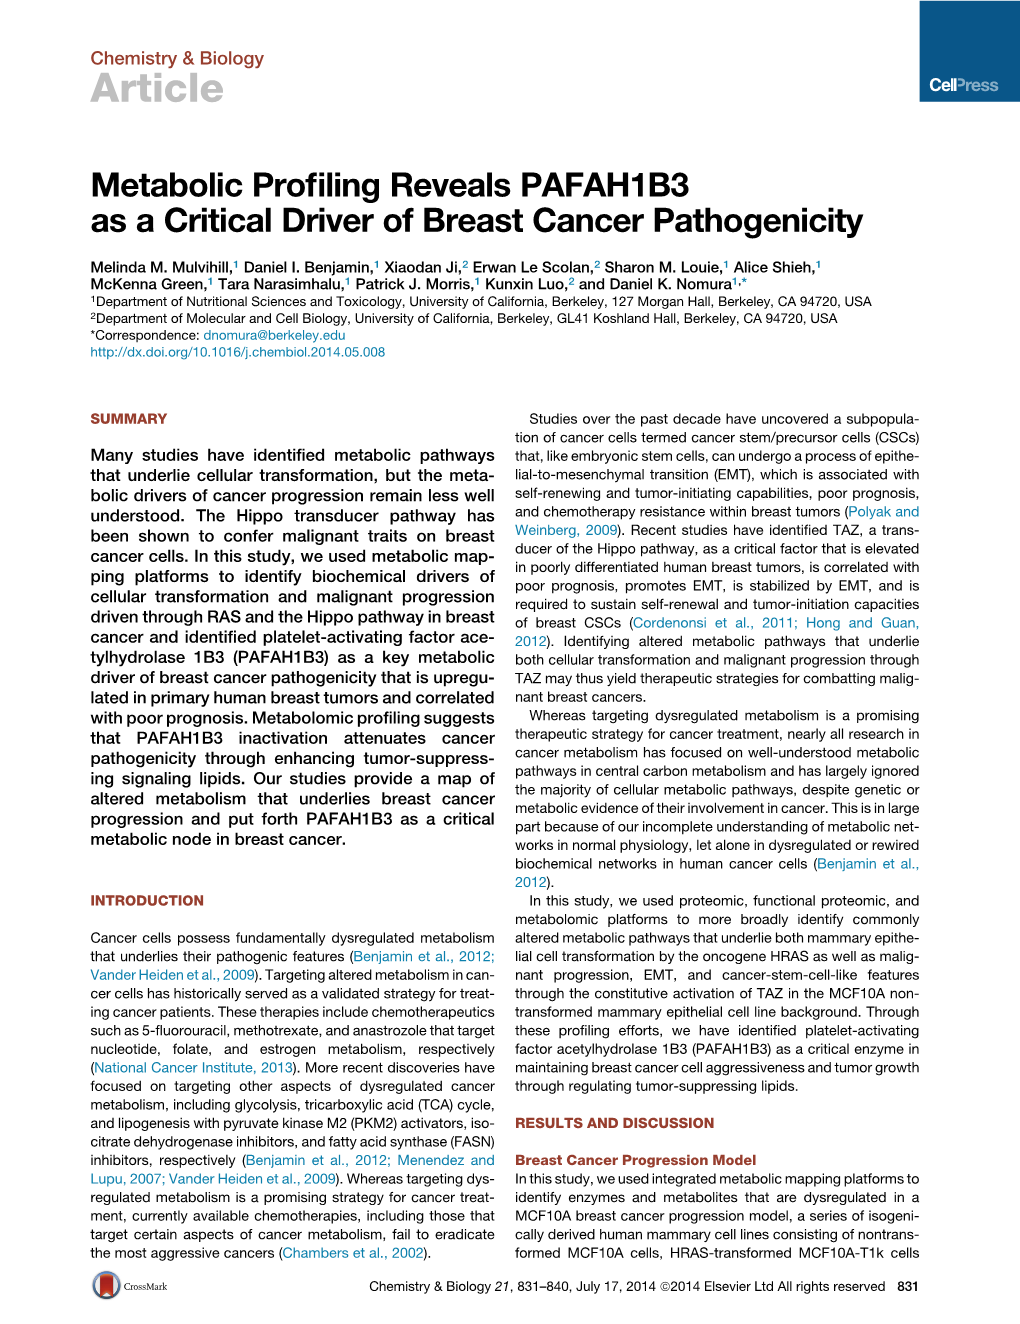 Metabolic Profiling Reveals PAFAH1B3 As a Critical Driver Of